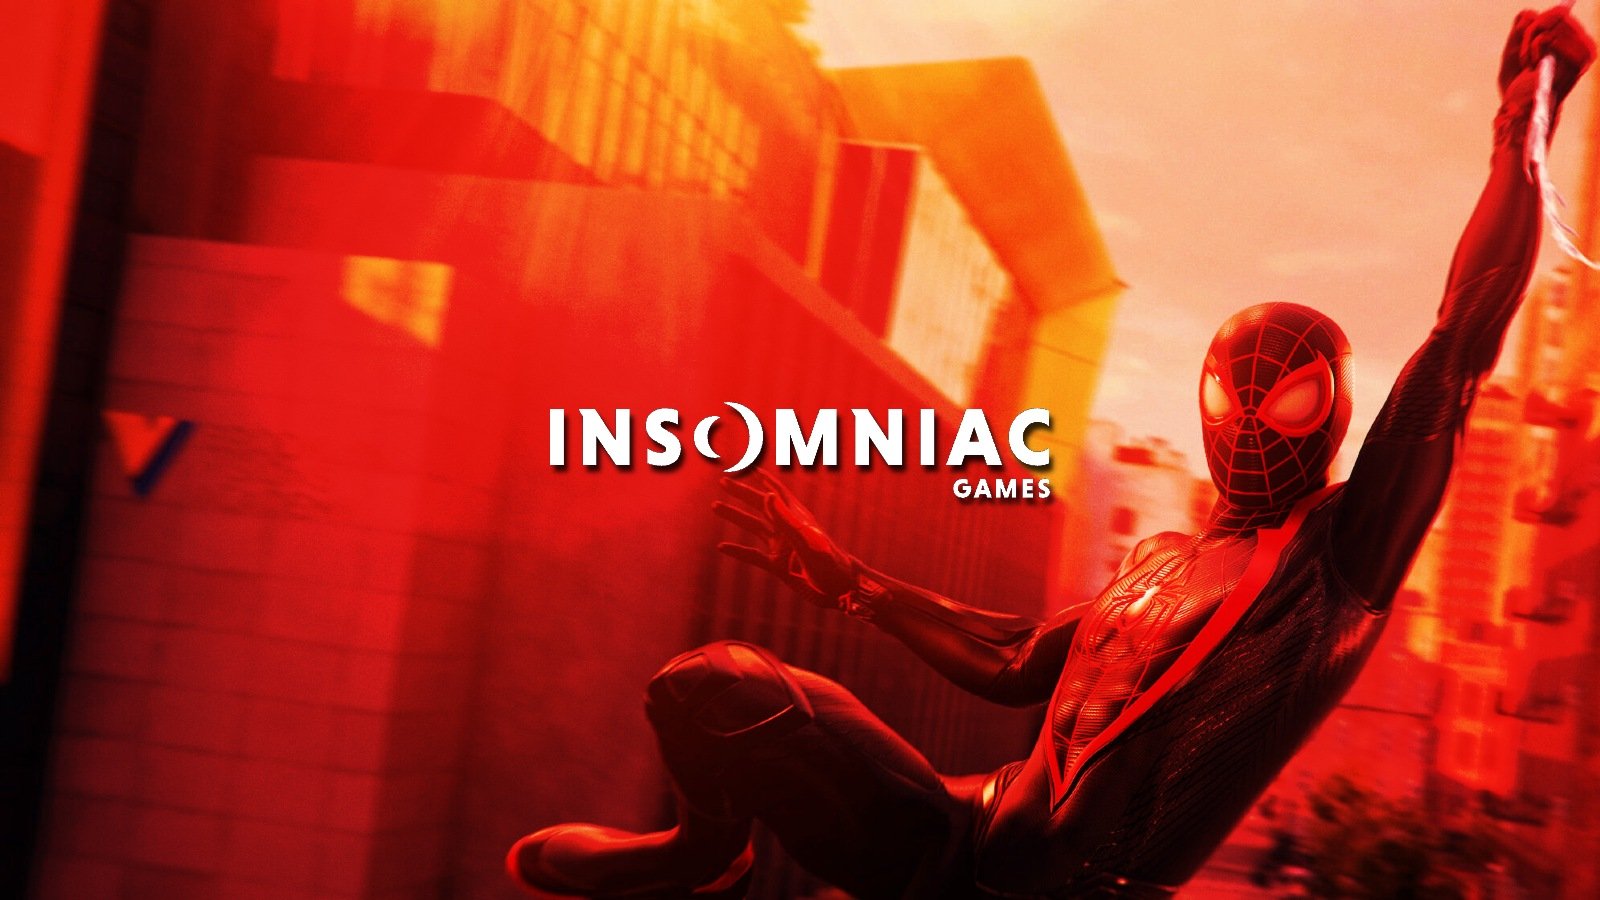 Insomniac Games alerts employees hit by ransomware data breach – Source: www.bleepingcomputer.com